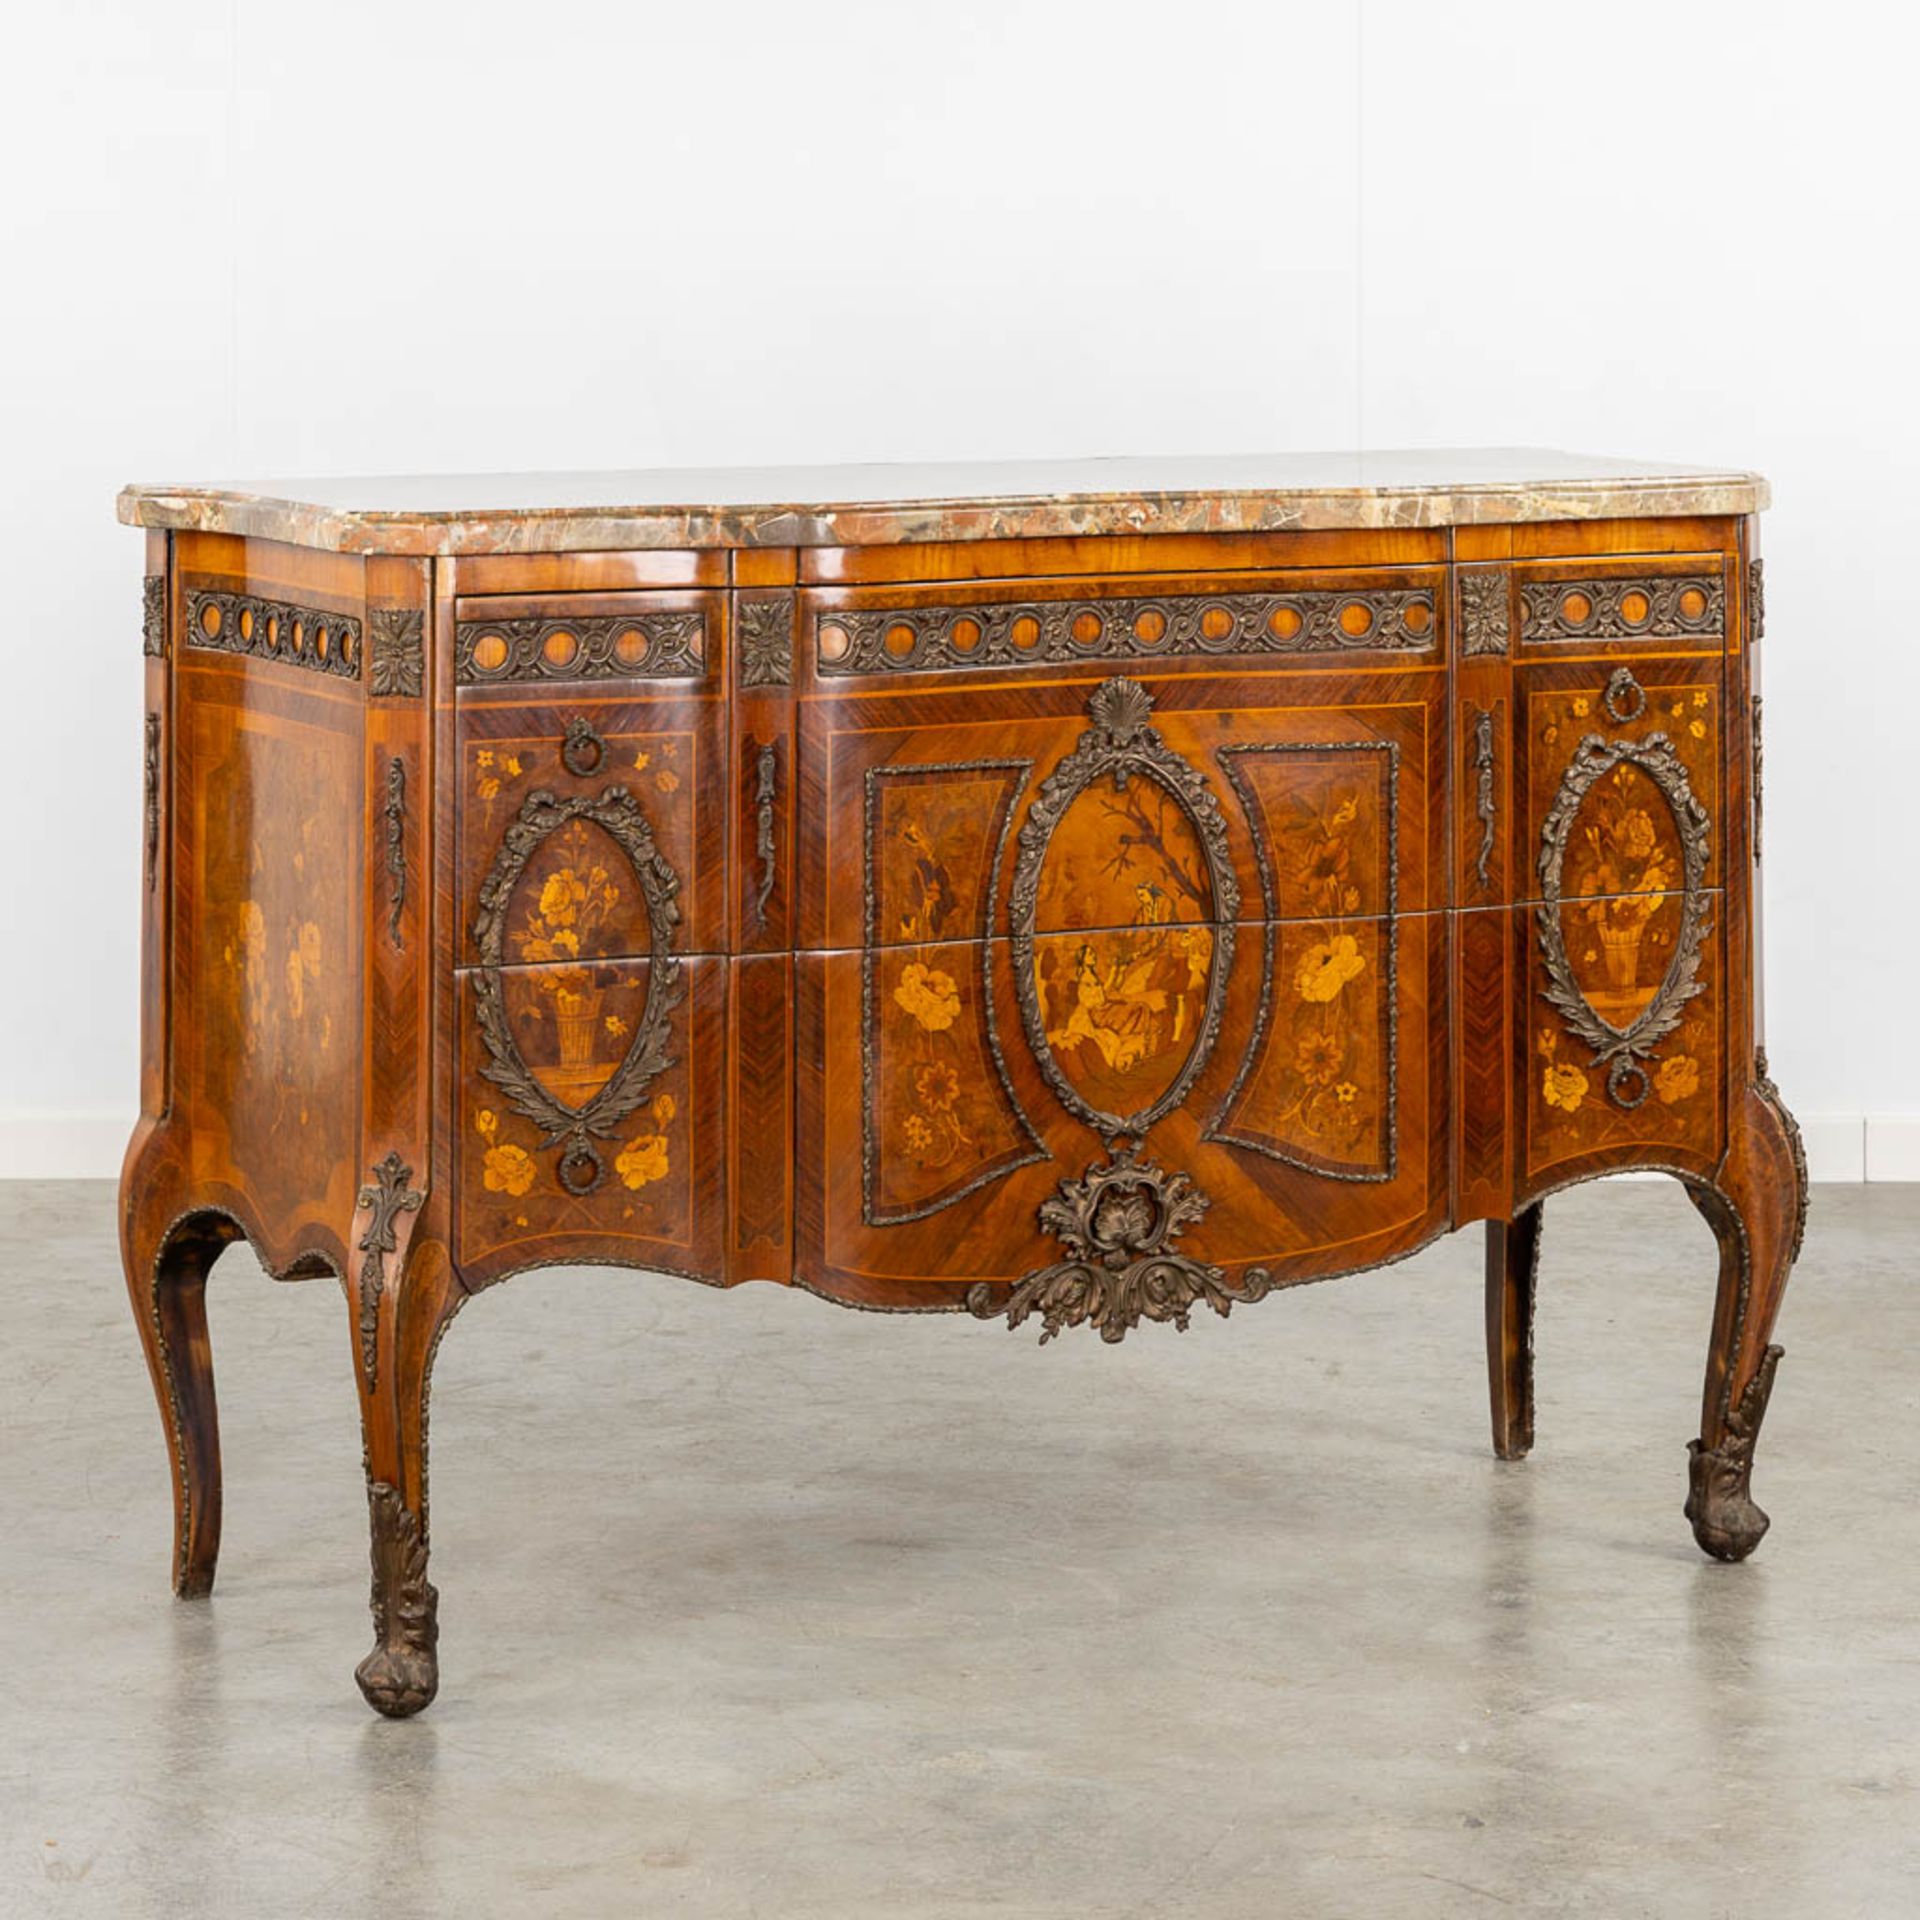 A commode with a marble top, marquetry inlay and mounted with bronze. Louis XVI style. (L:51 x W:131